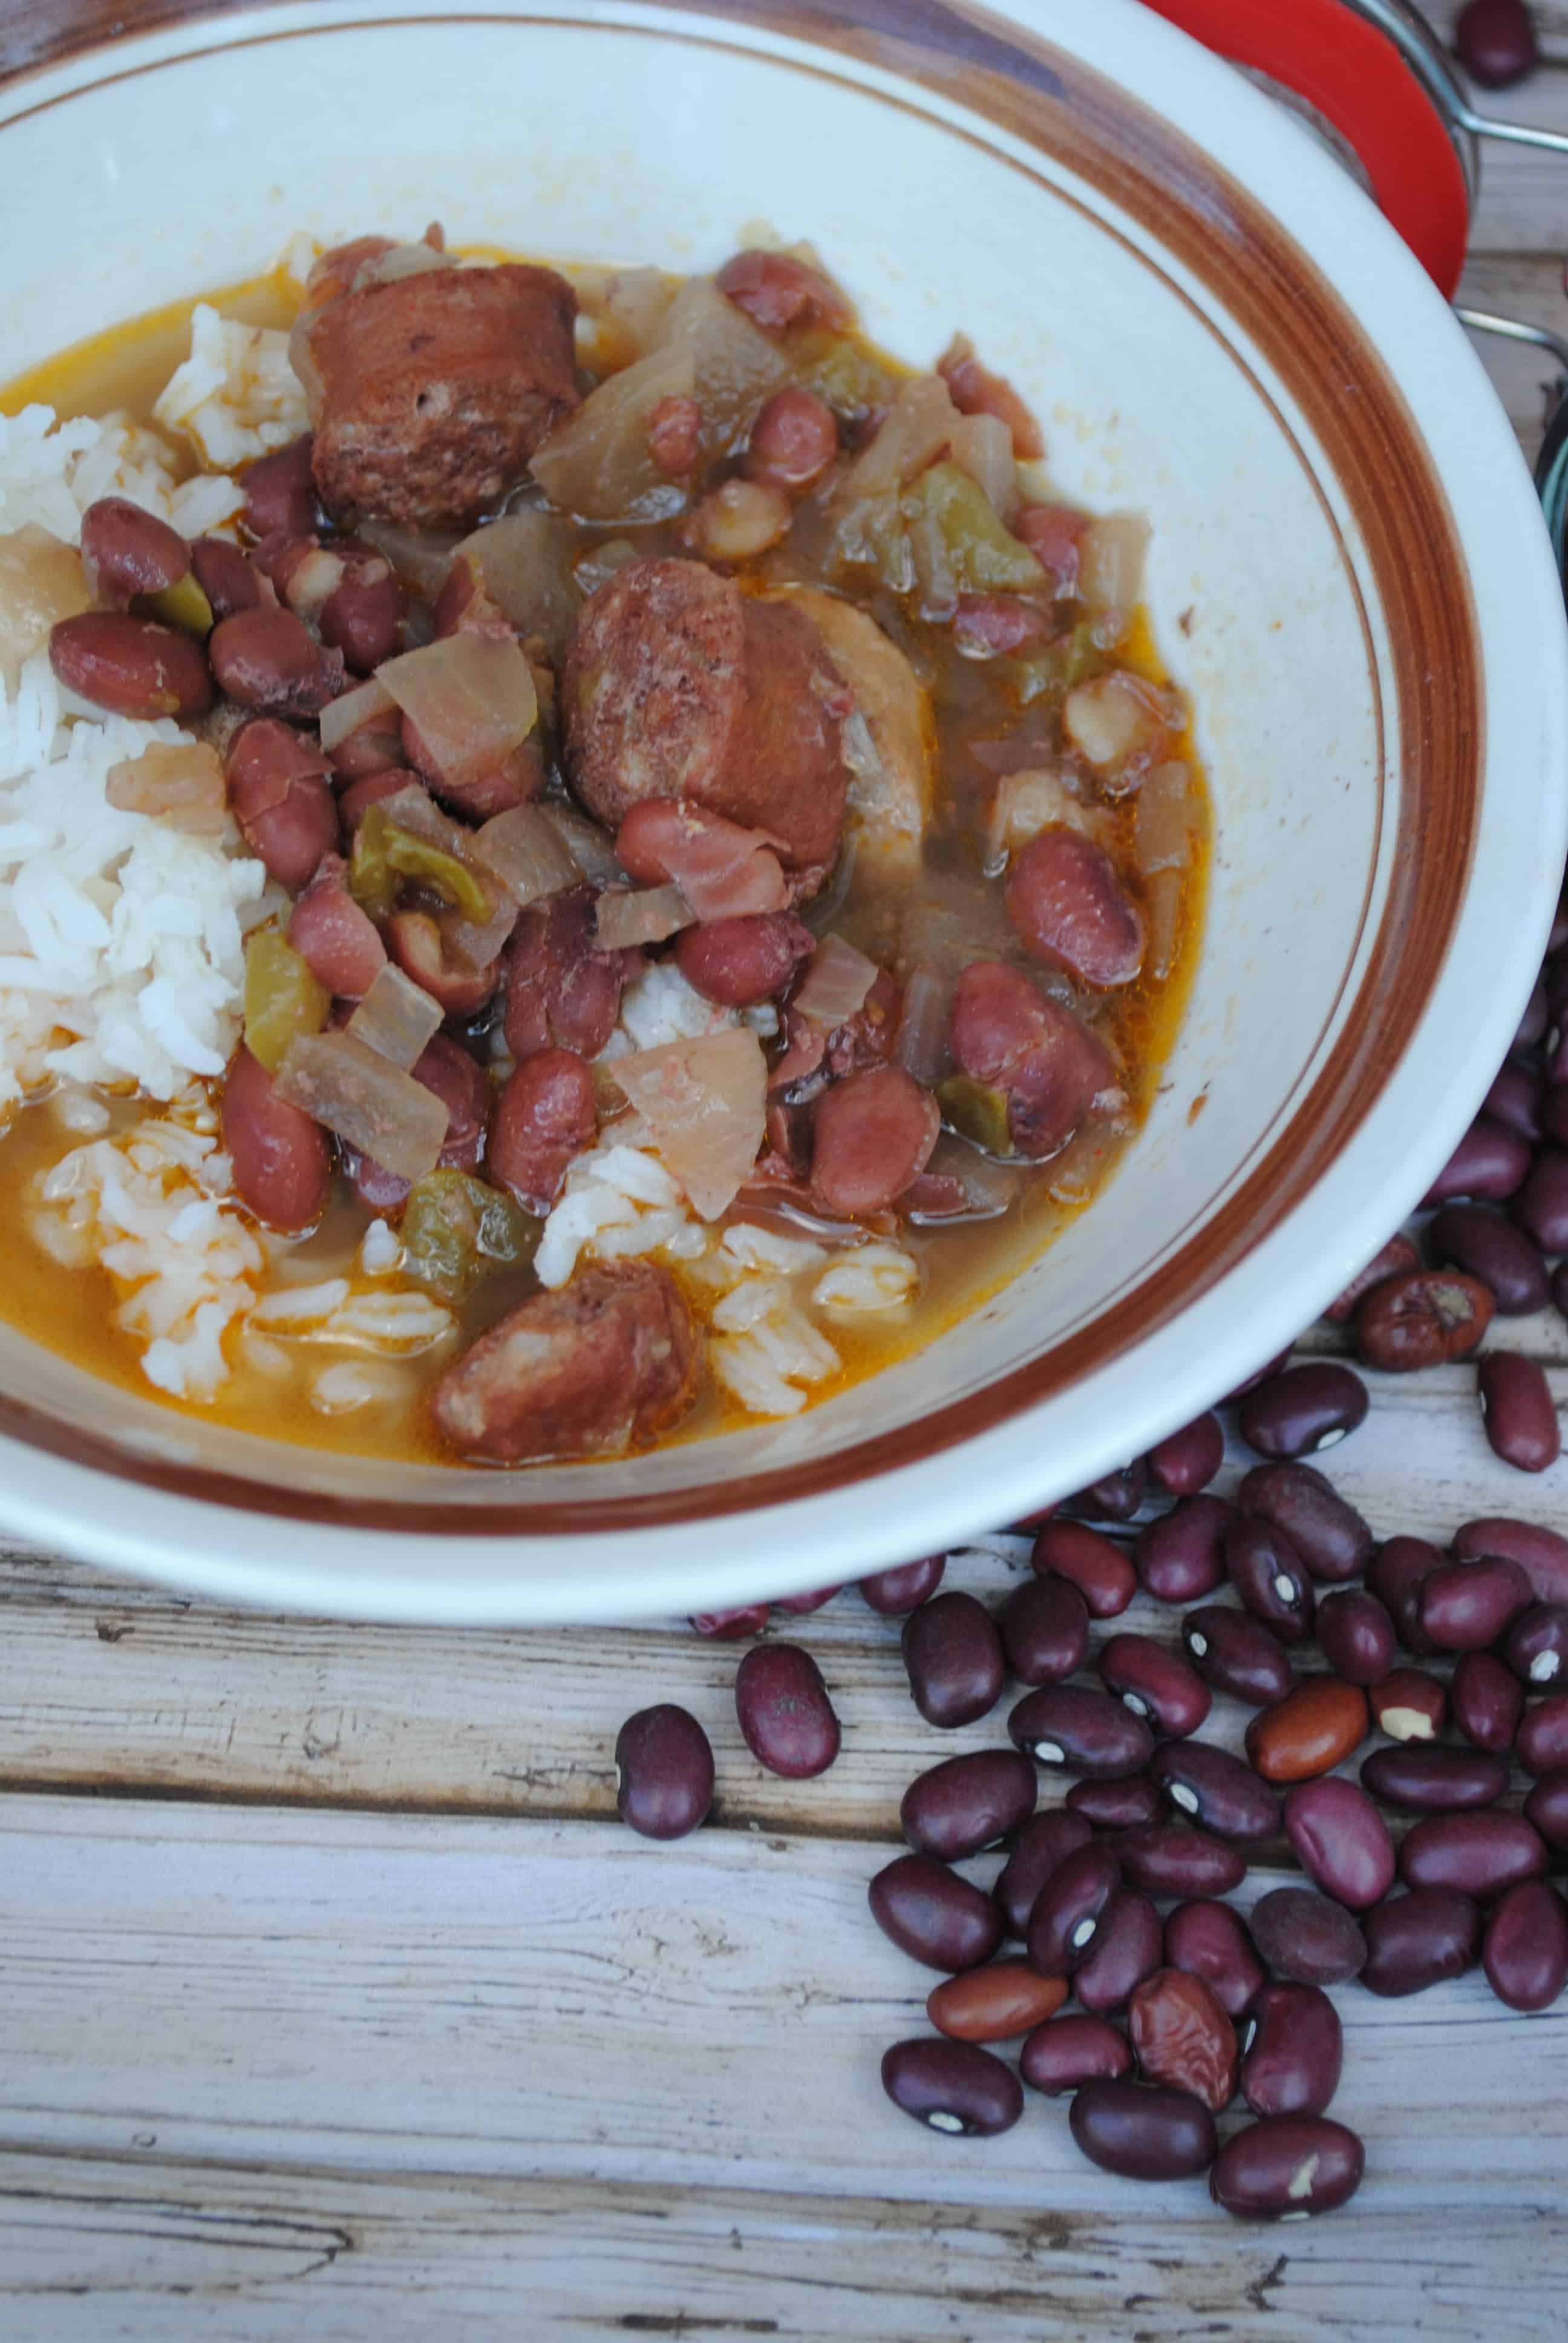 Slow cooker red beans and rice - Eat Well Spend Smart